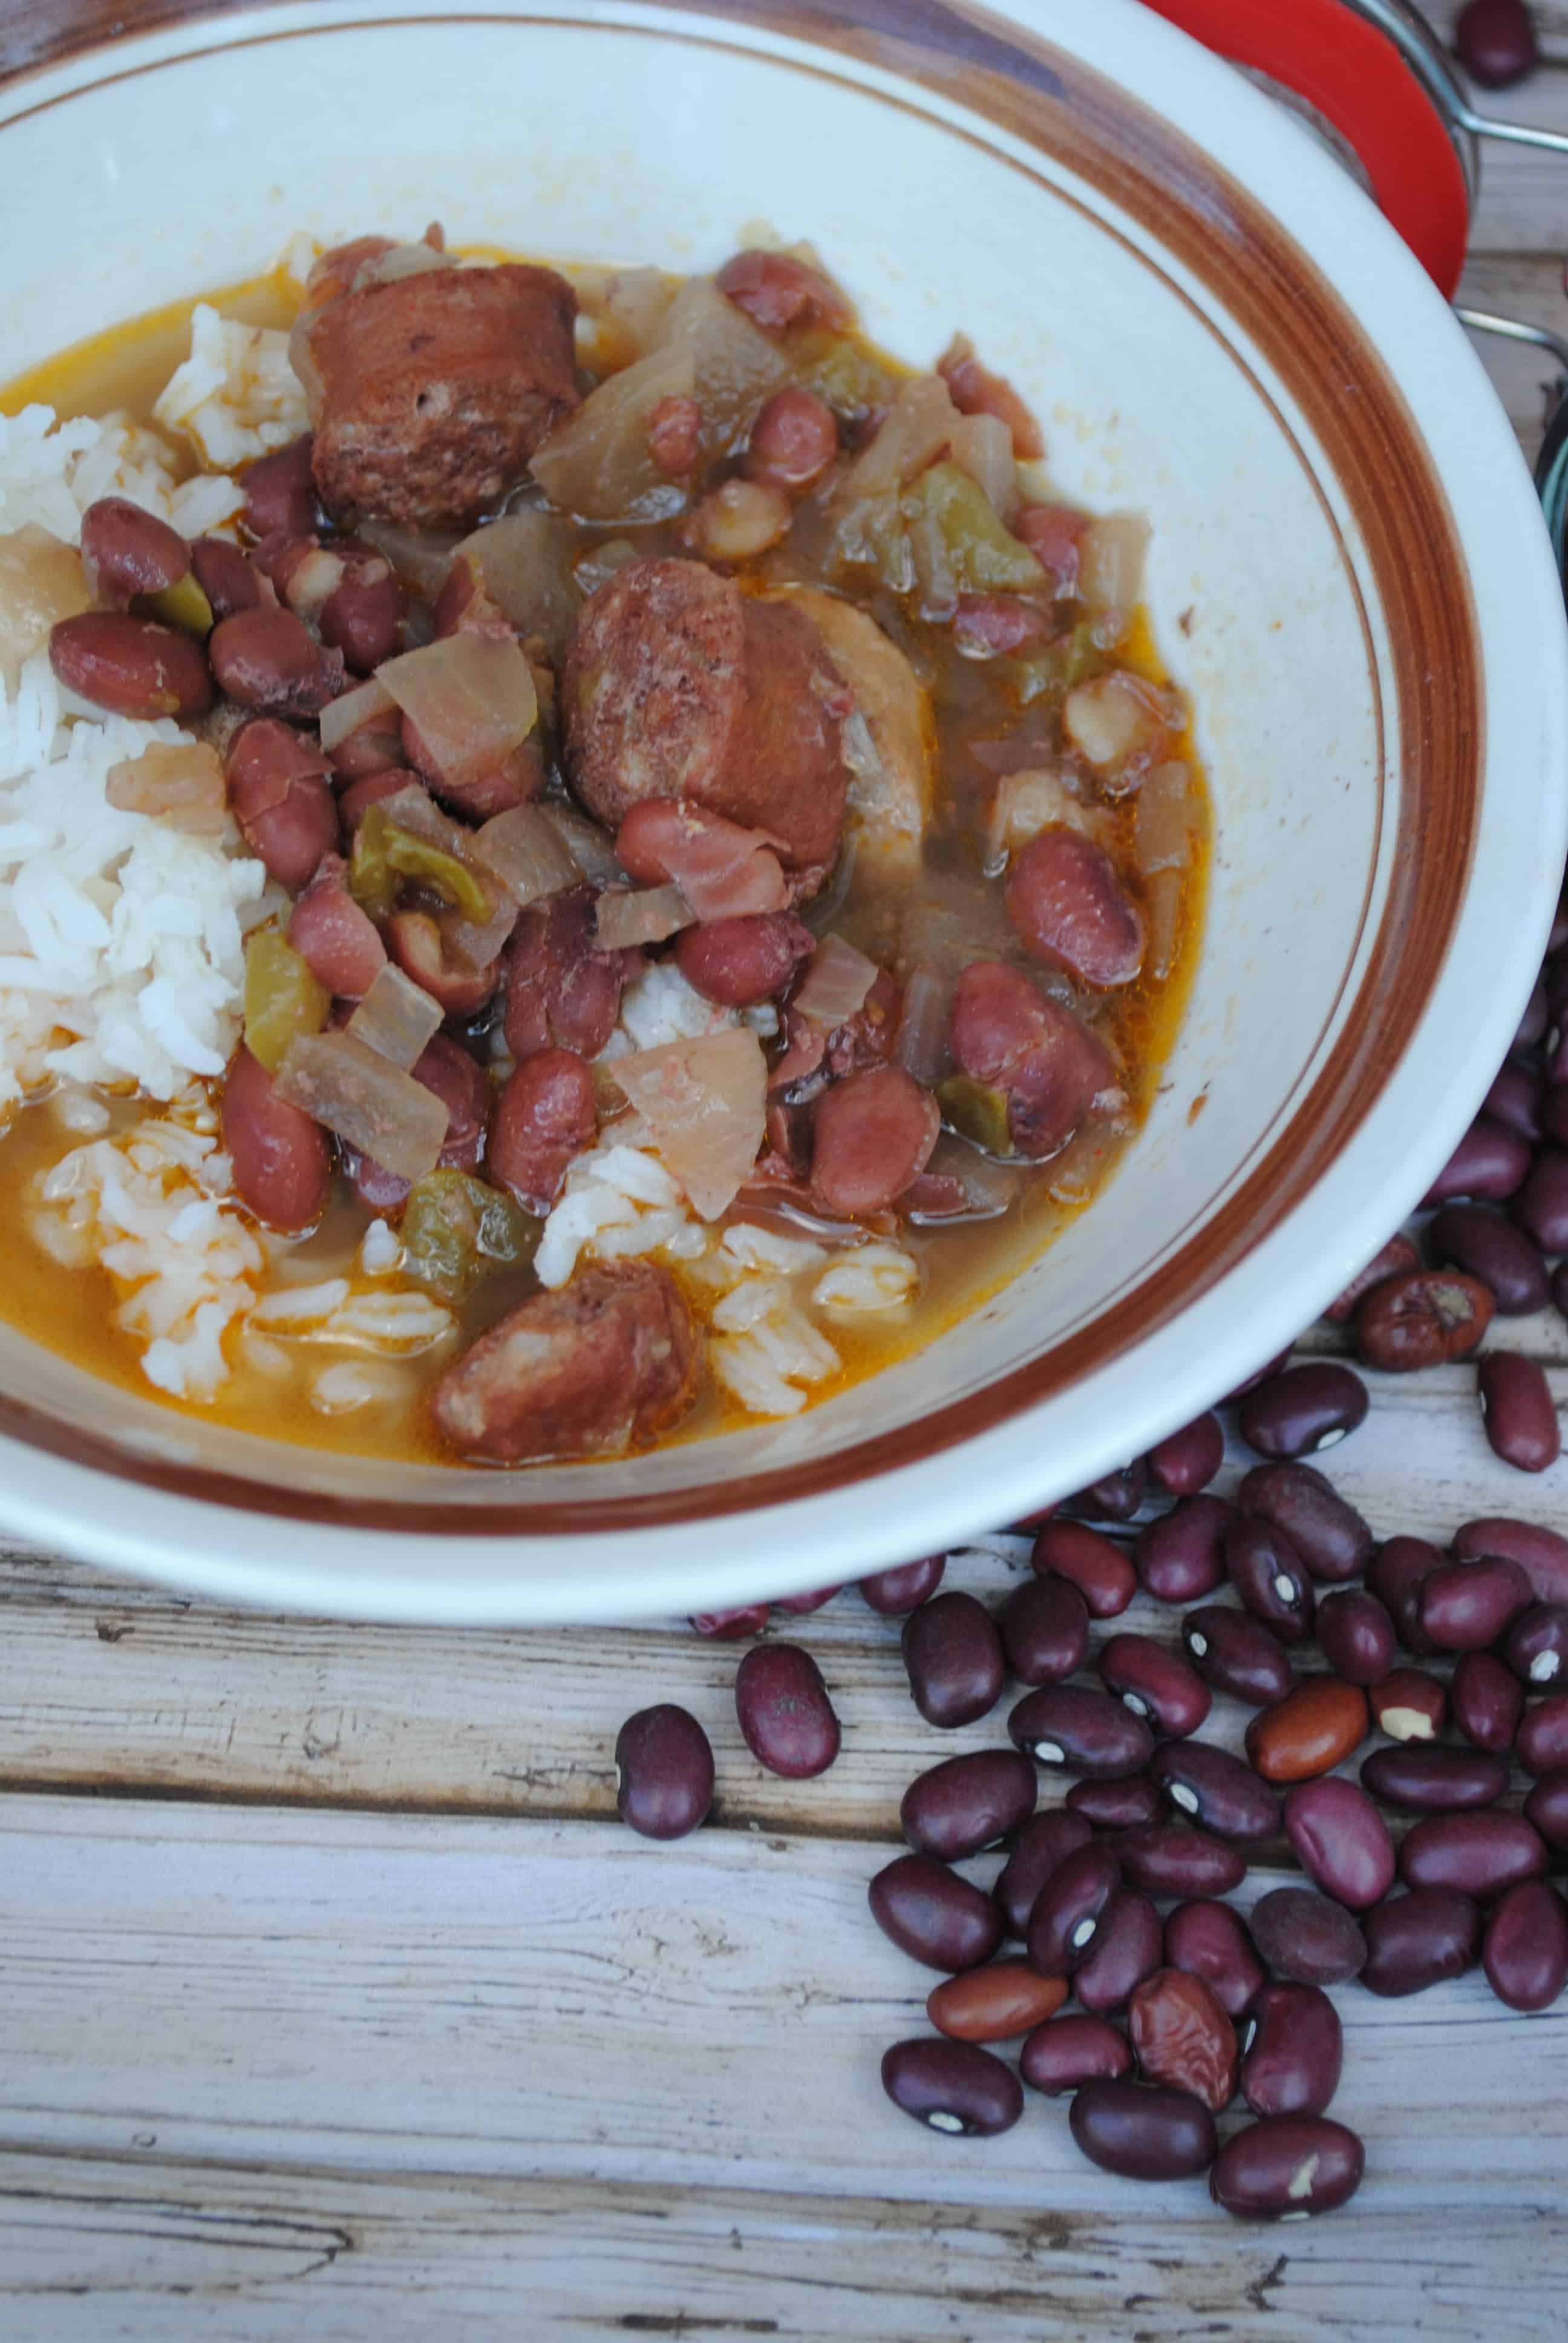 Slow cooker red beans and rice - Eat Well Spend Smart